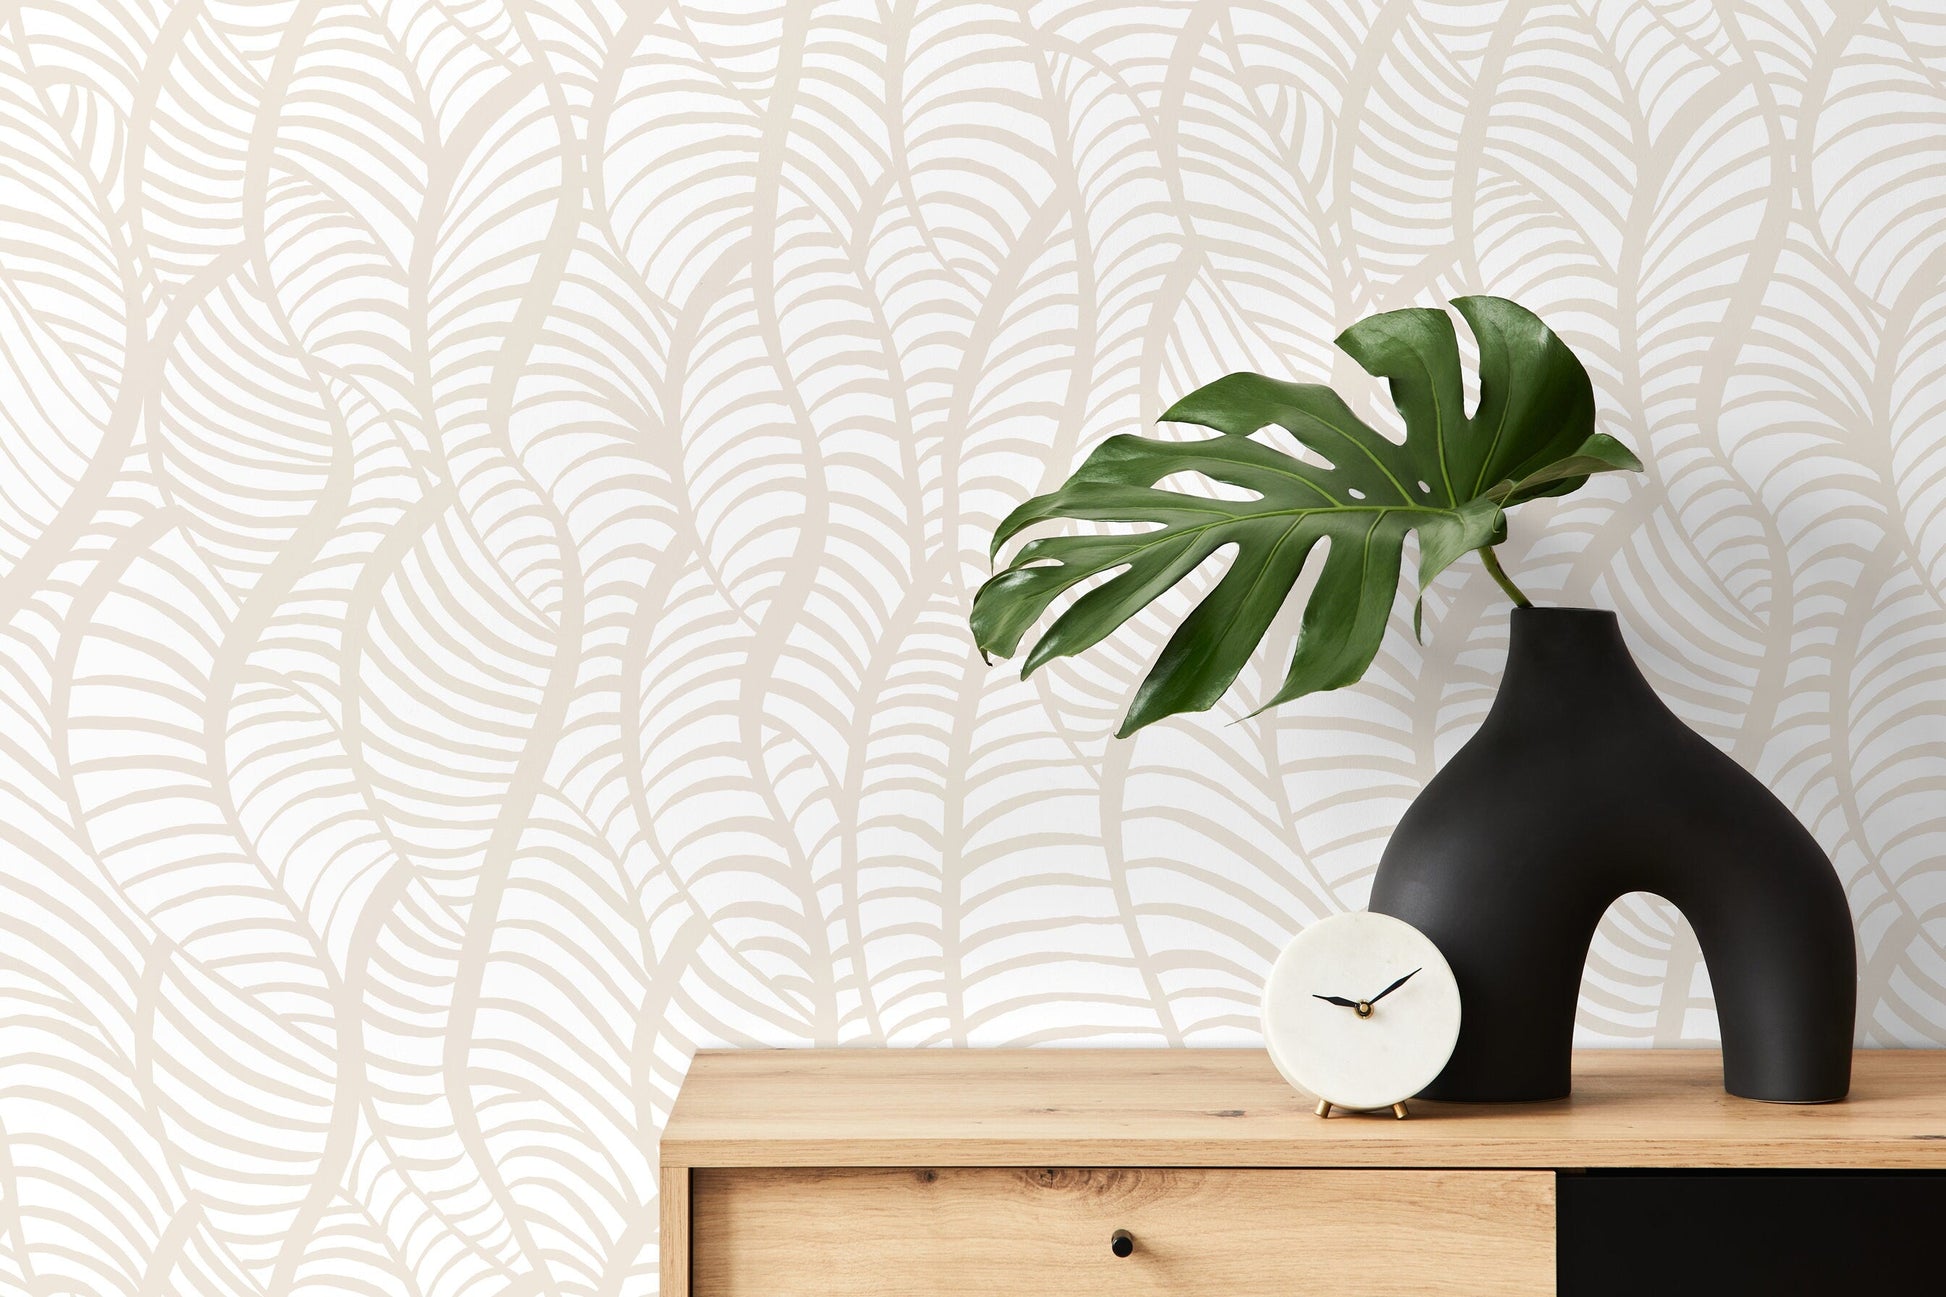 Beige Abstract Leaf Wallpaper / Peel and Stick Wallpaper Removable Wallpaper Home Decor Wall Art Wall Decor Room Decor - C640